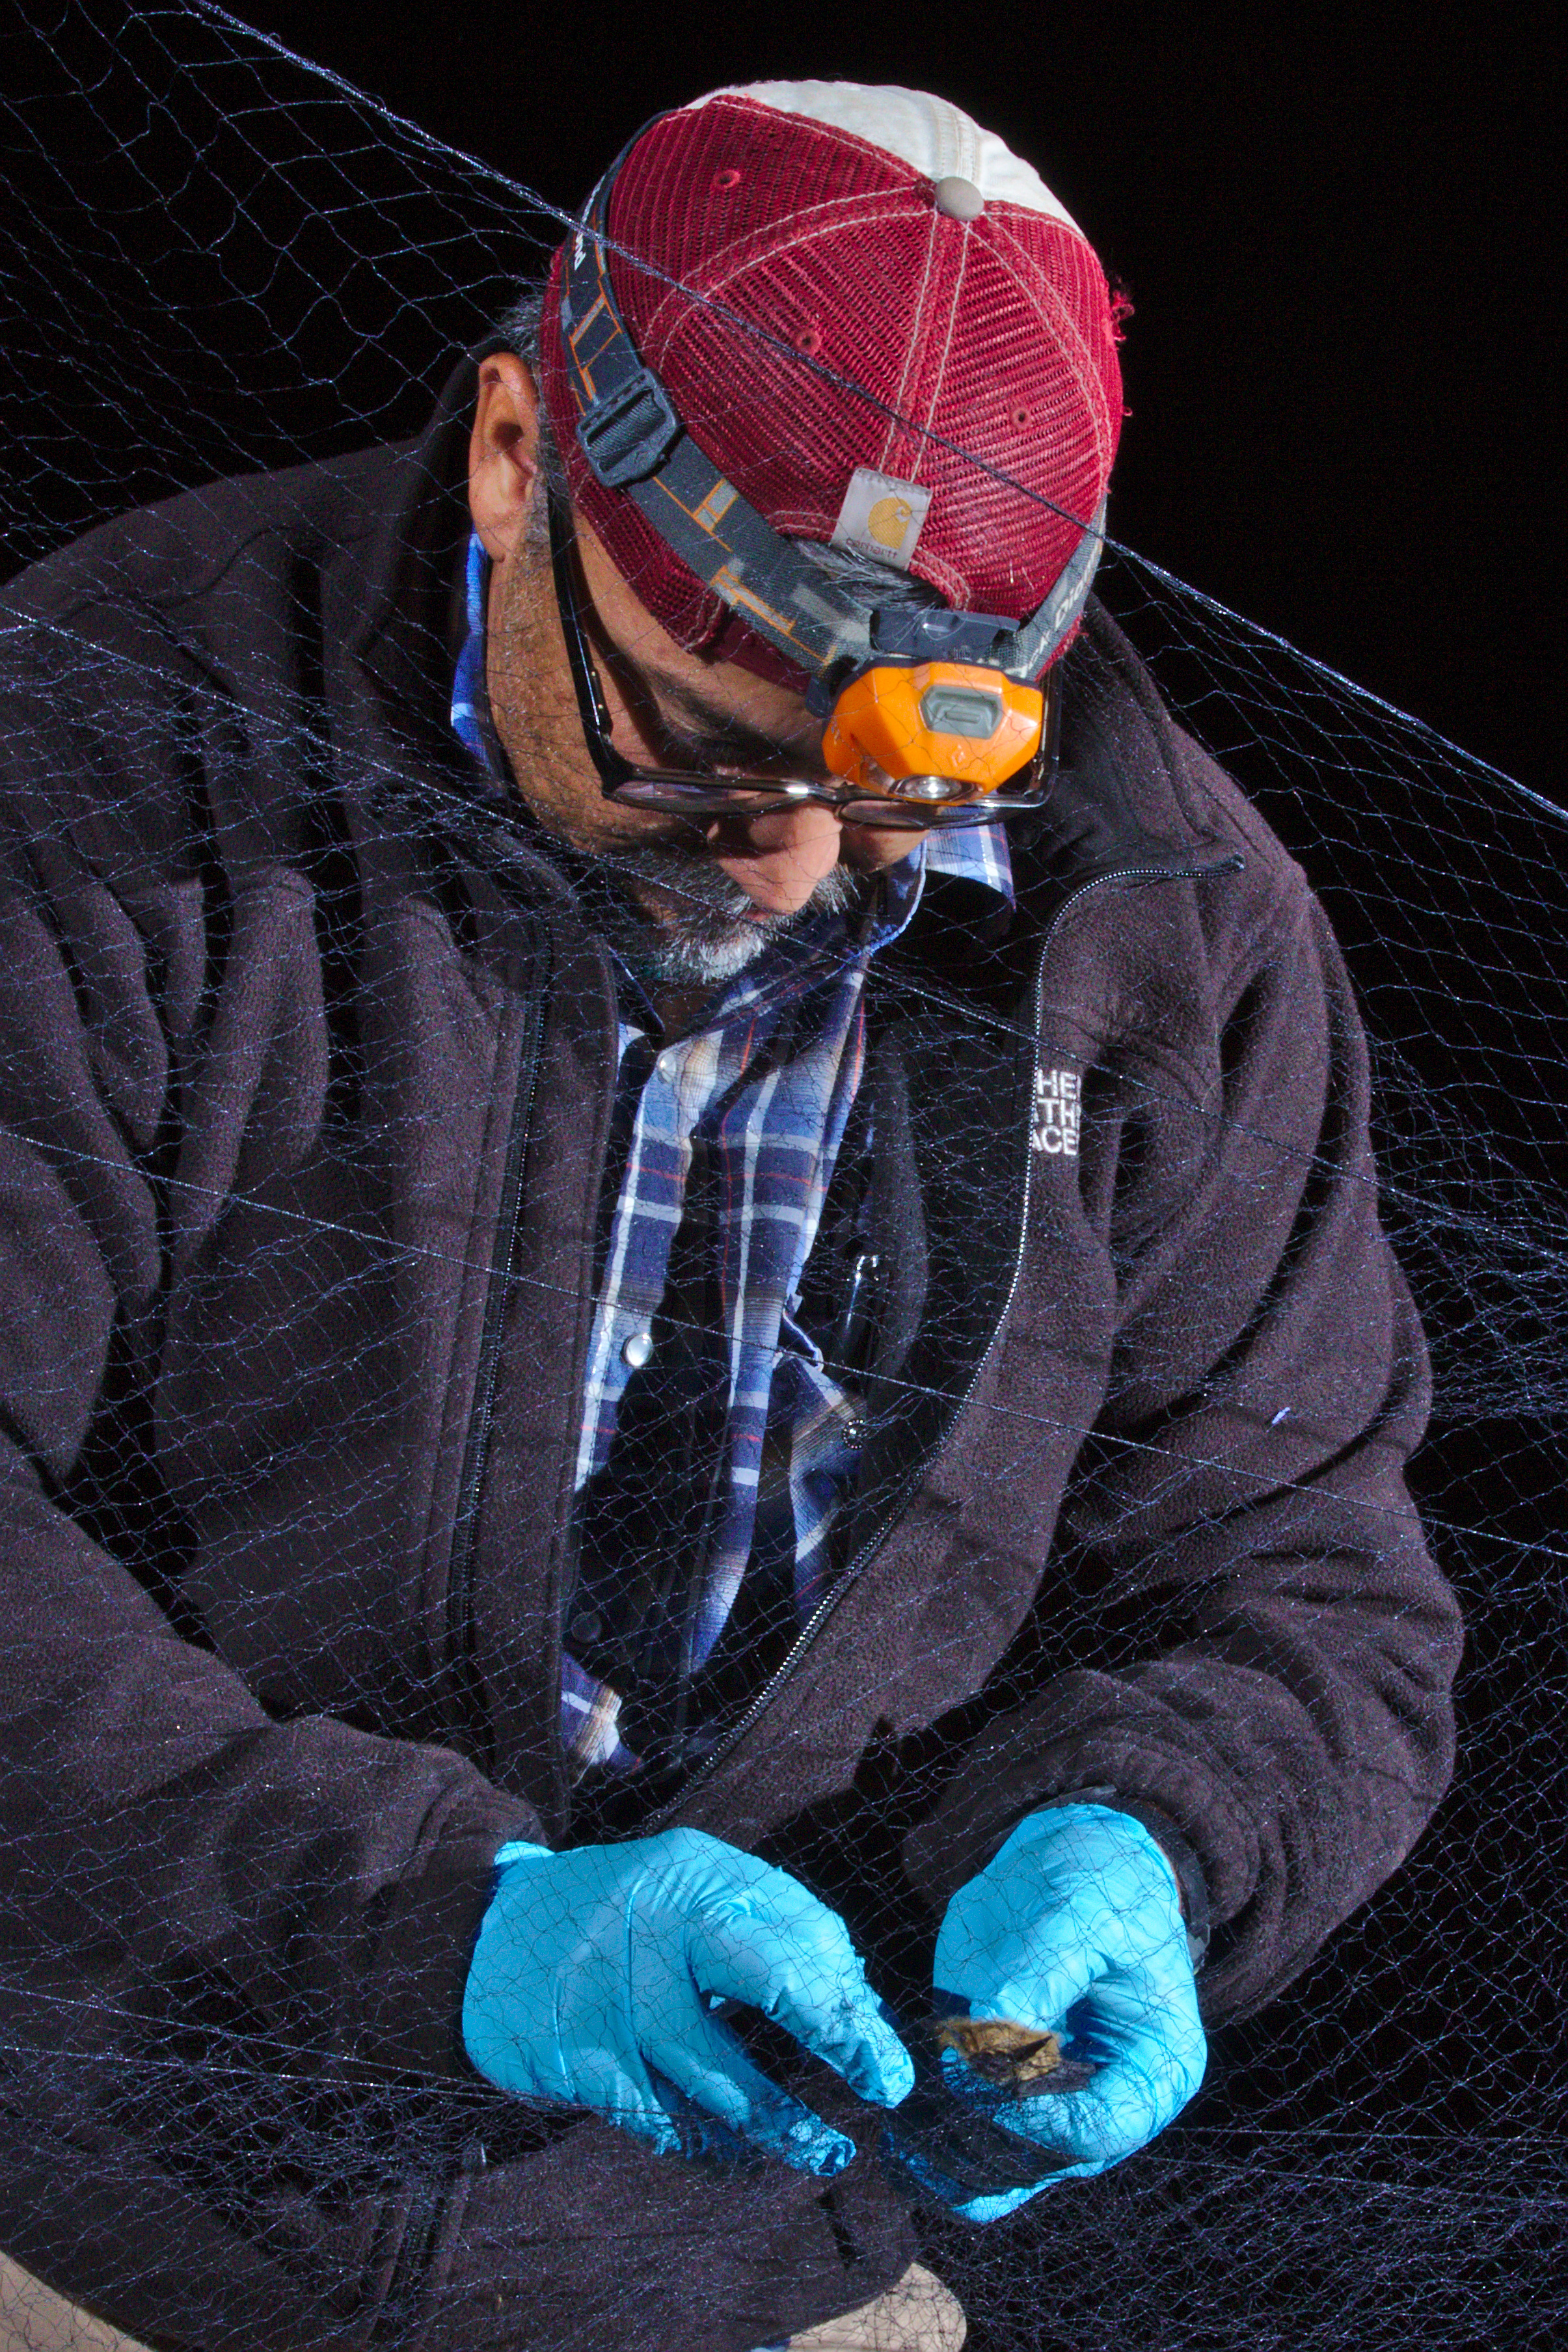 Ernie removing a Myotis from the net